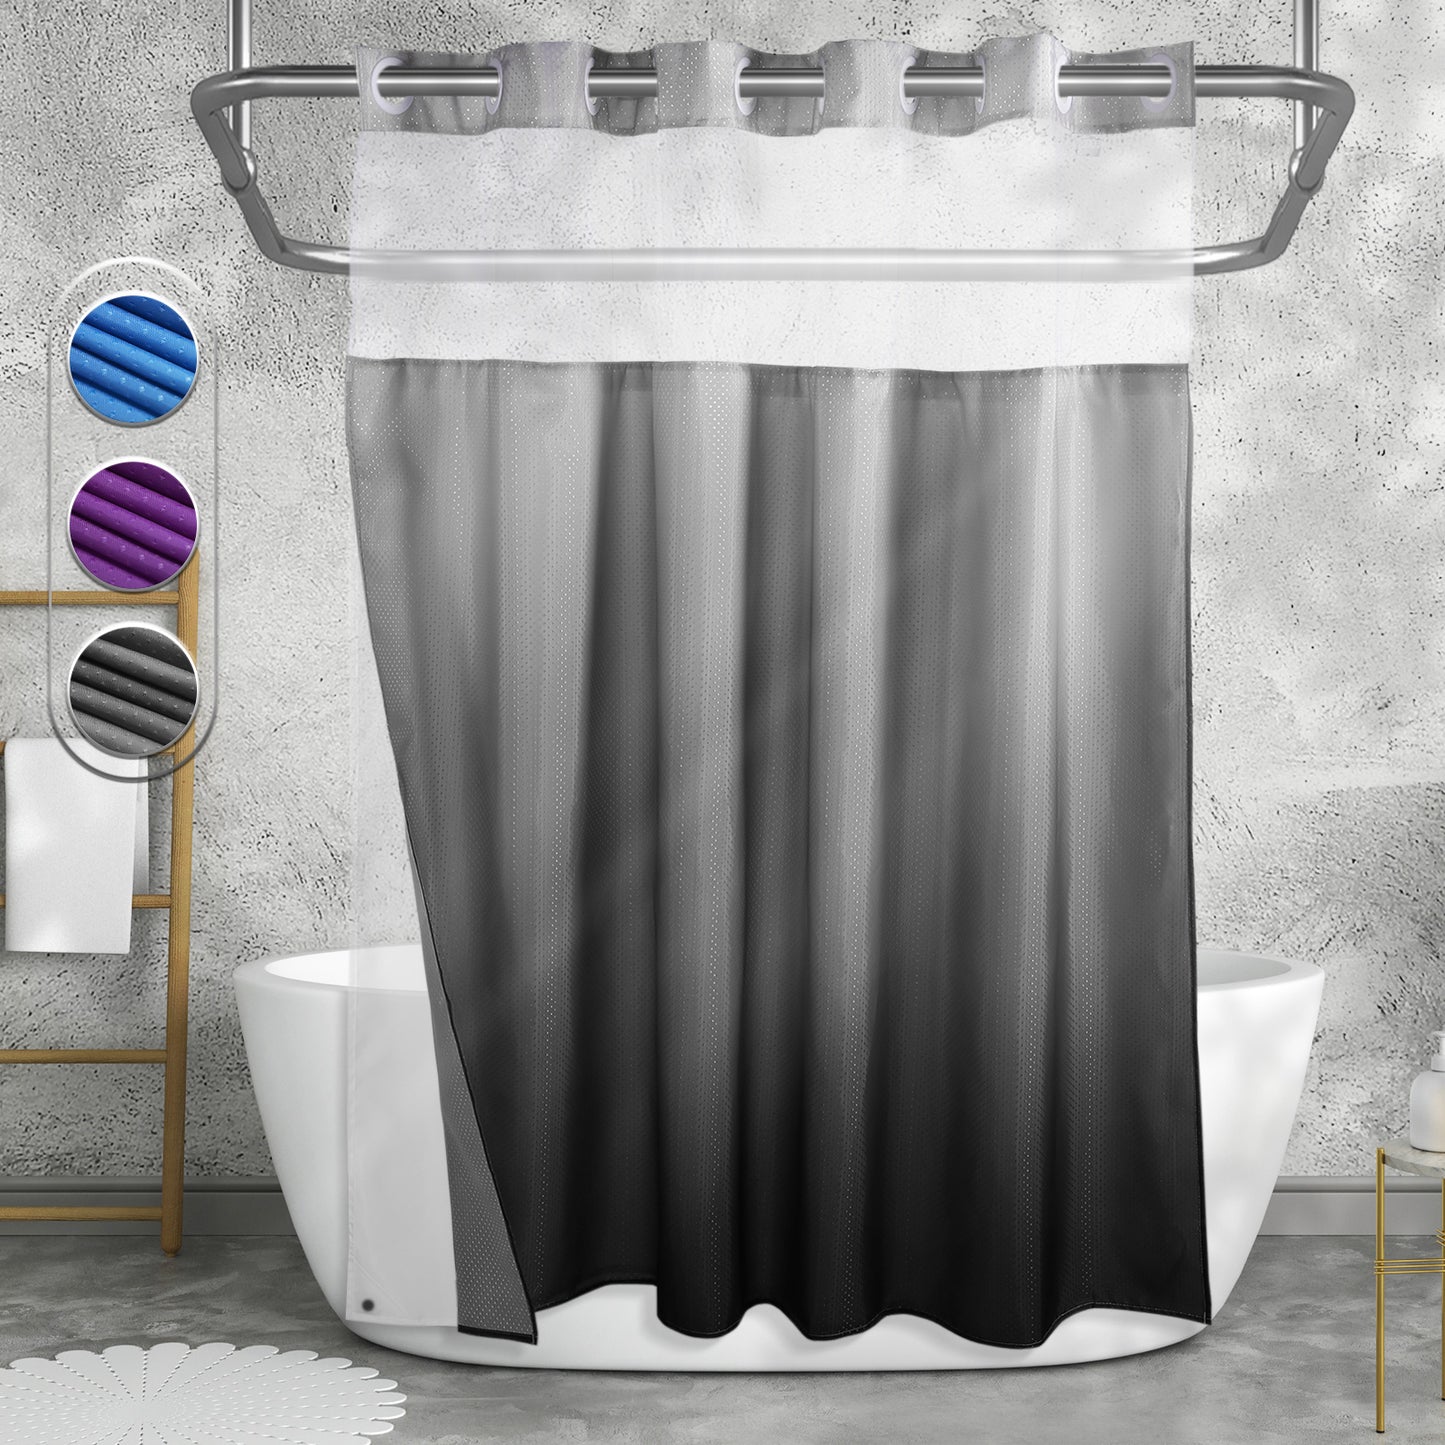 CozyHook Ombre Hook Free Shower Curtain with Snap-in Liner| Gray Gradient, 72Wx72L